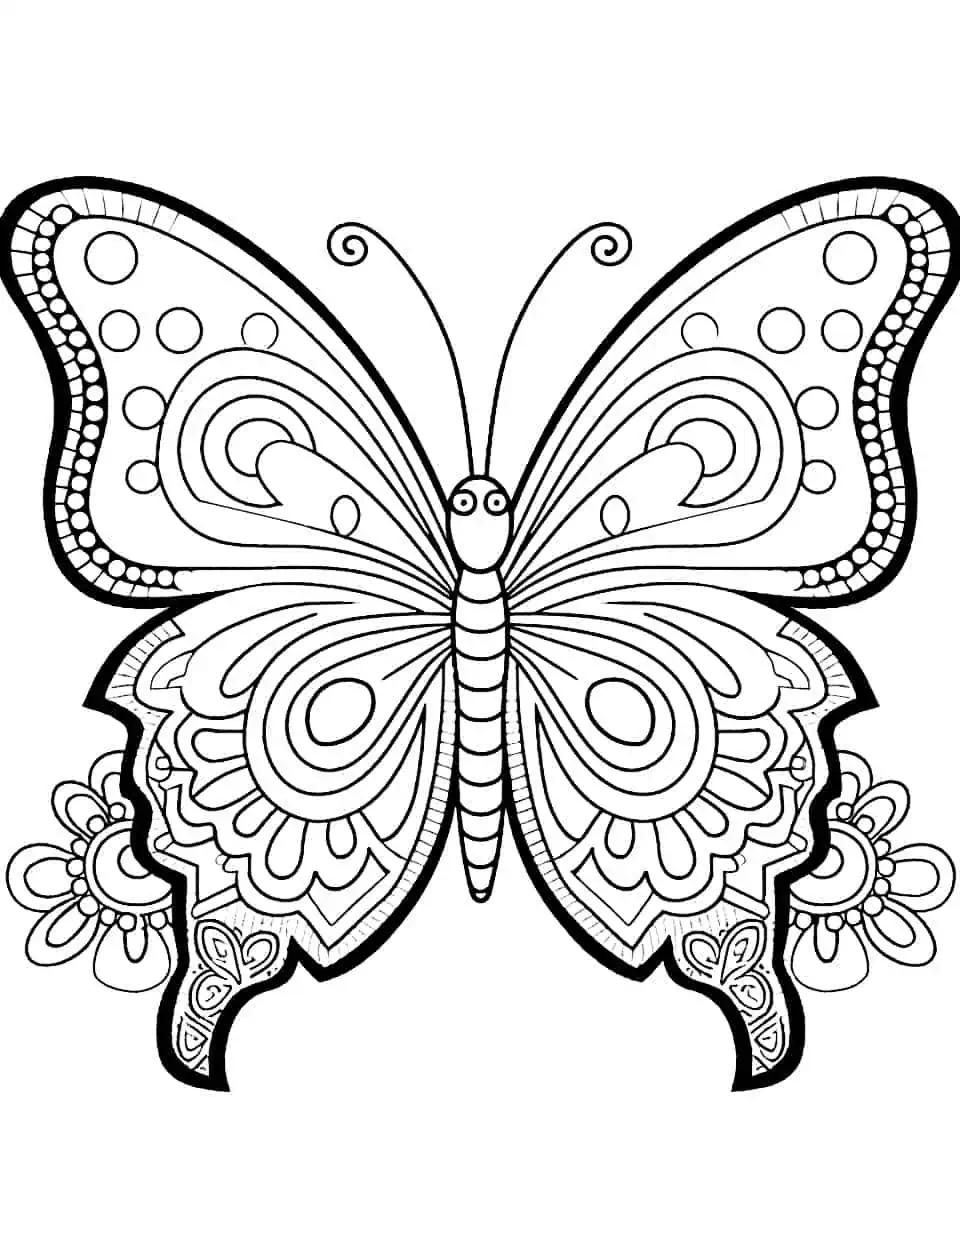 Stress-Relief Splendor Butterfly Coloring Page - A mandala-style coloring page featuring a butterfly surrounded by soothing patterns.